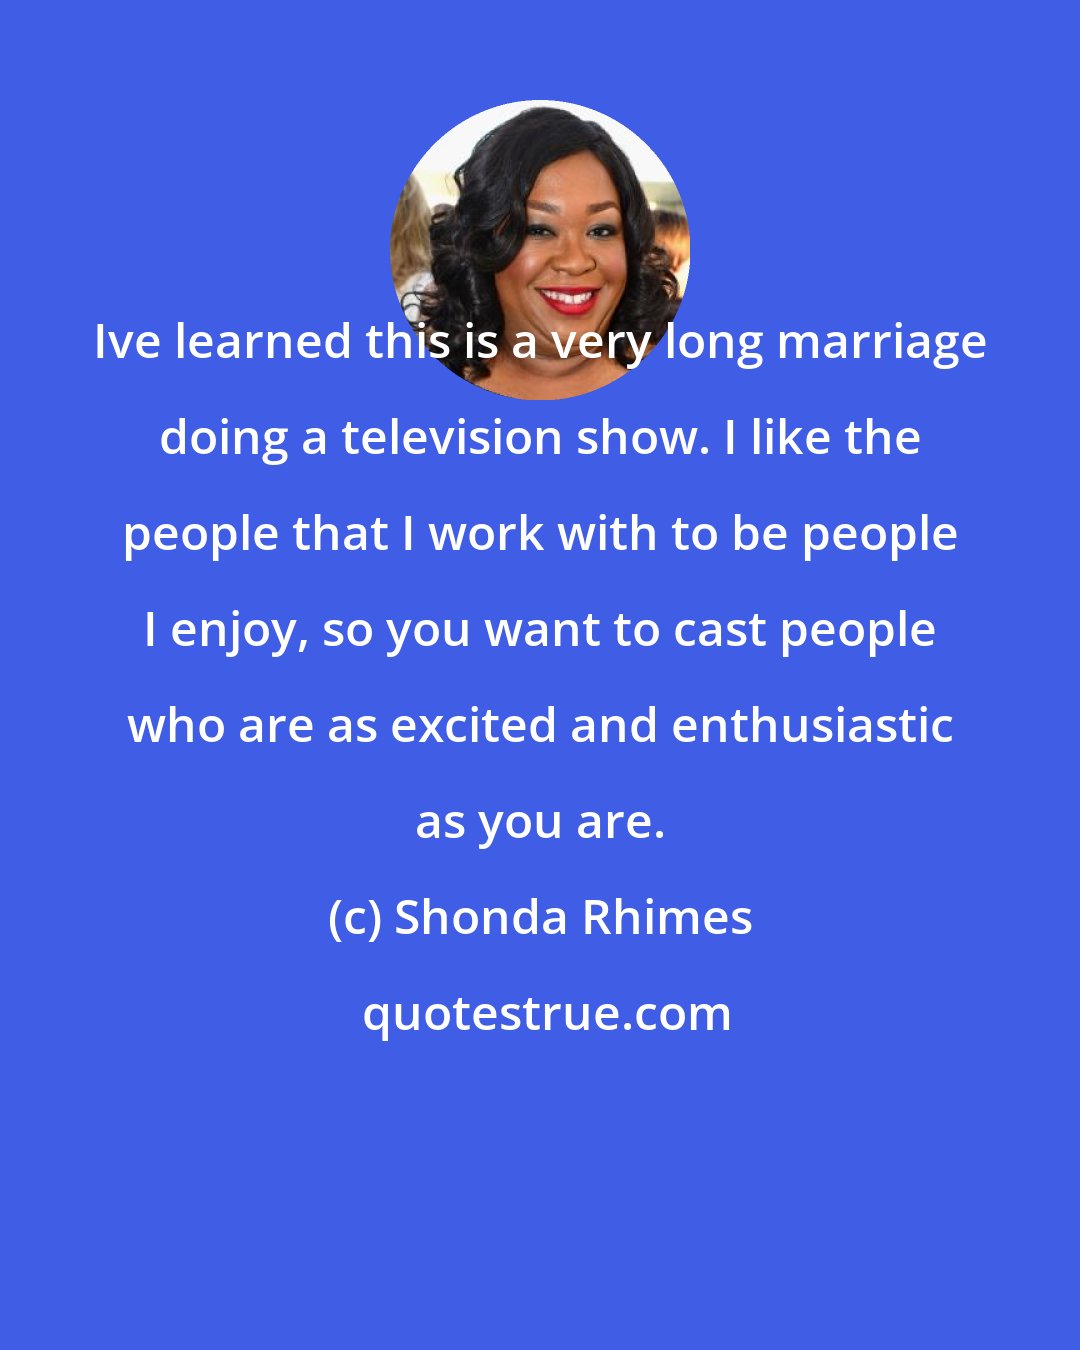 Shonda Rhimes: Ive learned this is a very long marriage doing a television show. I like the people that I work with to be people I enjoy, so you want to cast people who are as excited and enthusiastic as you are.